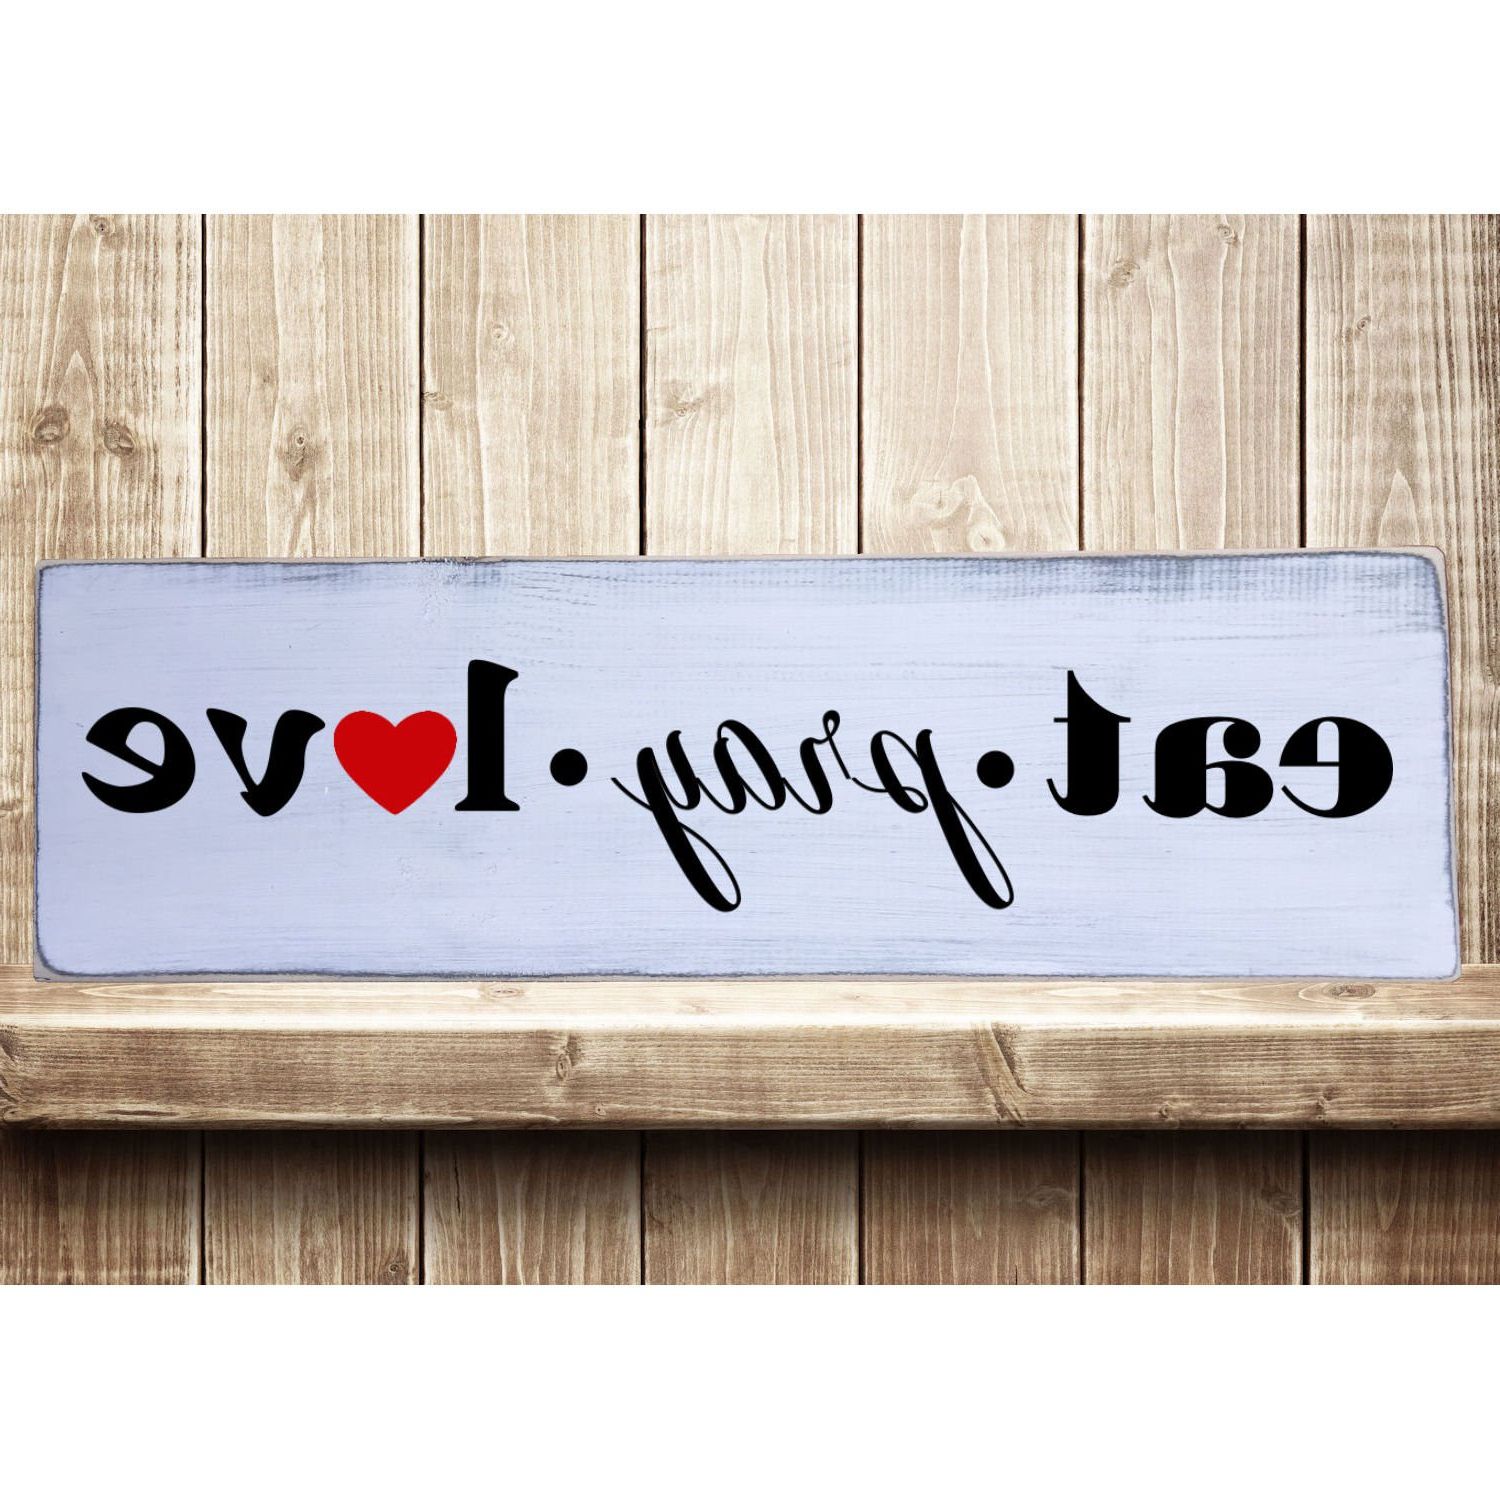 Popular Amazon: Eat Pray Love Rustic Farmhouse Style Handmade Real With Regard To Eat Rustic Farmhouse Wood Wall Decor (View 20 of 20)